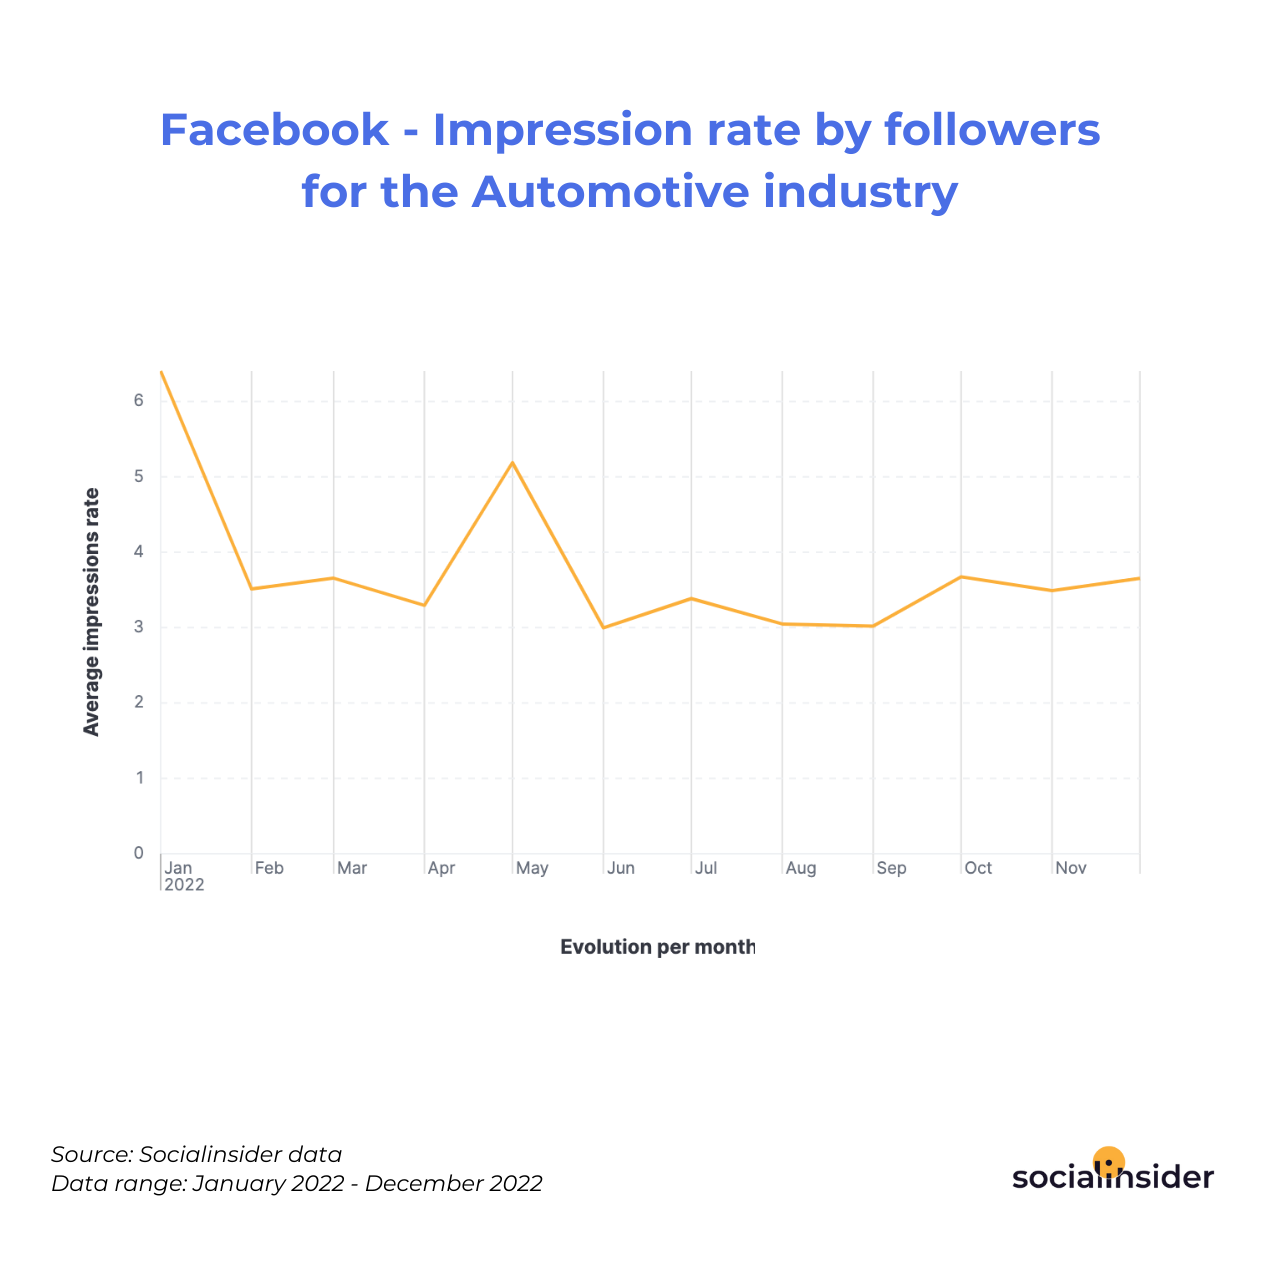 Facebook - Impression rate by followers for the Automotive industry 